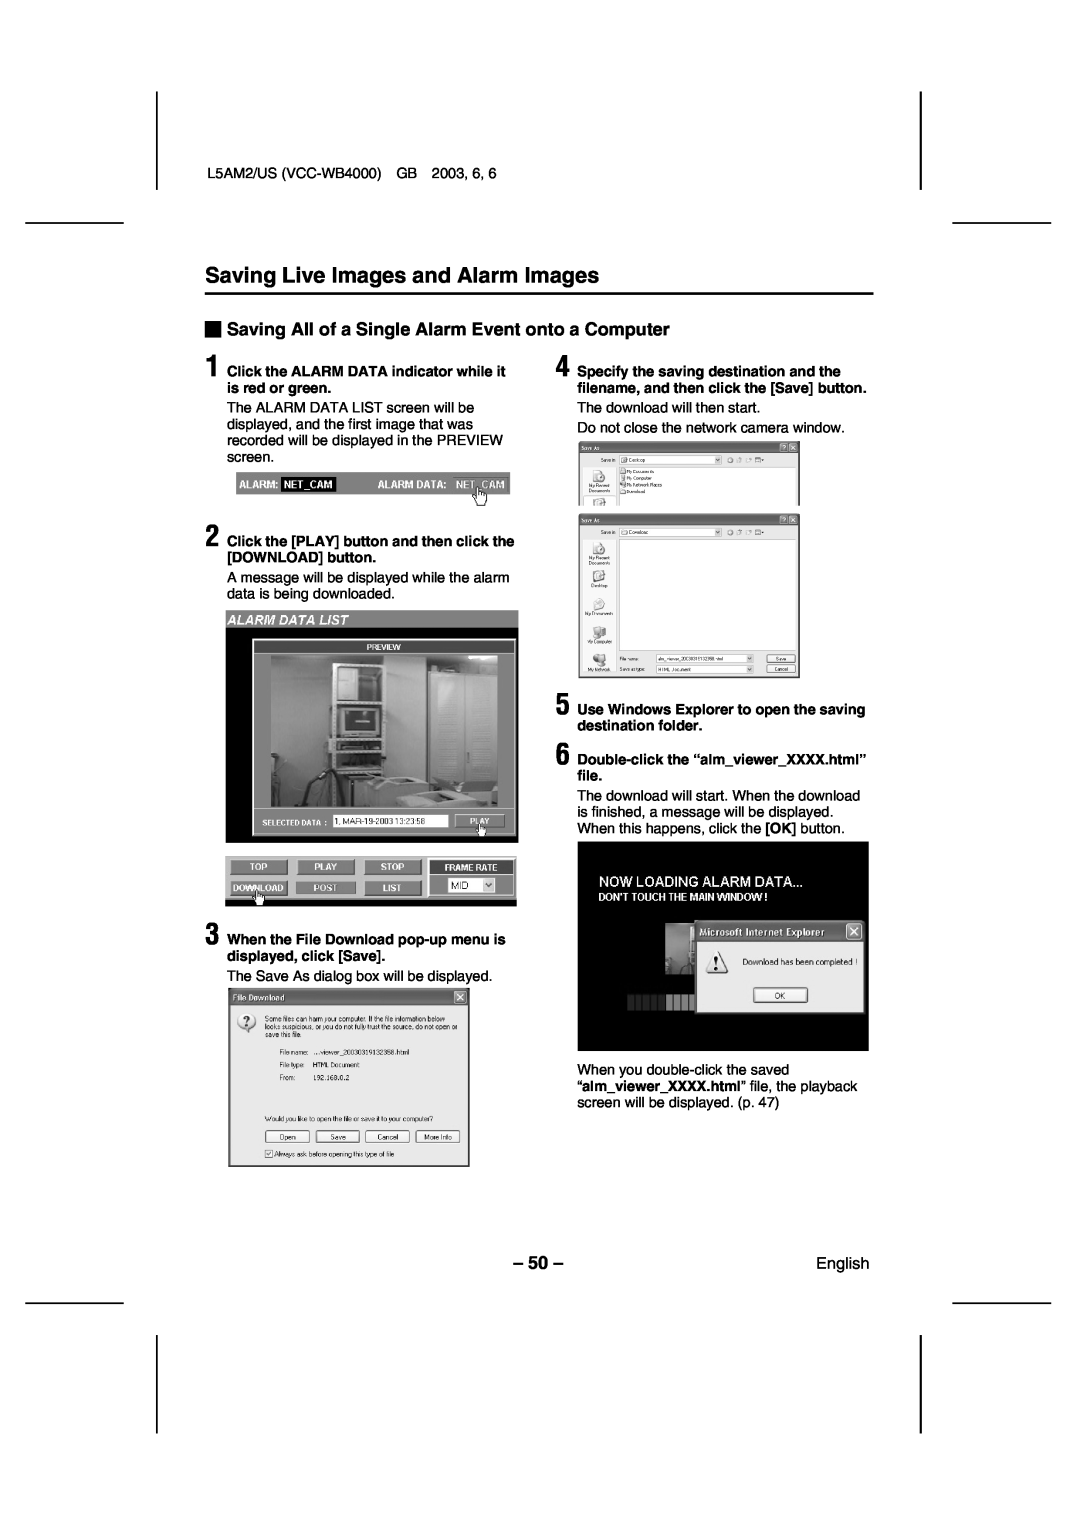 Sanyo VCC-WB4000 instruction manual Saving Live Images and Alarm Images, Saving All of a Single Alarm Event onto a Computer 